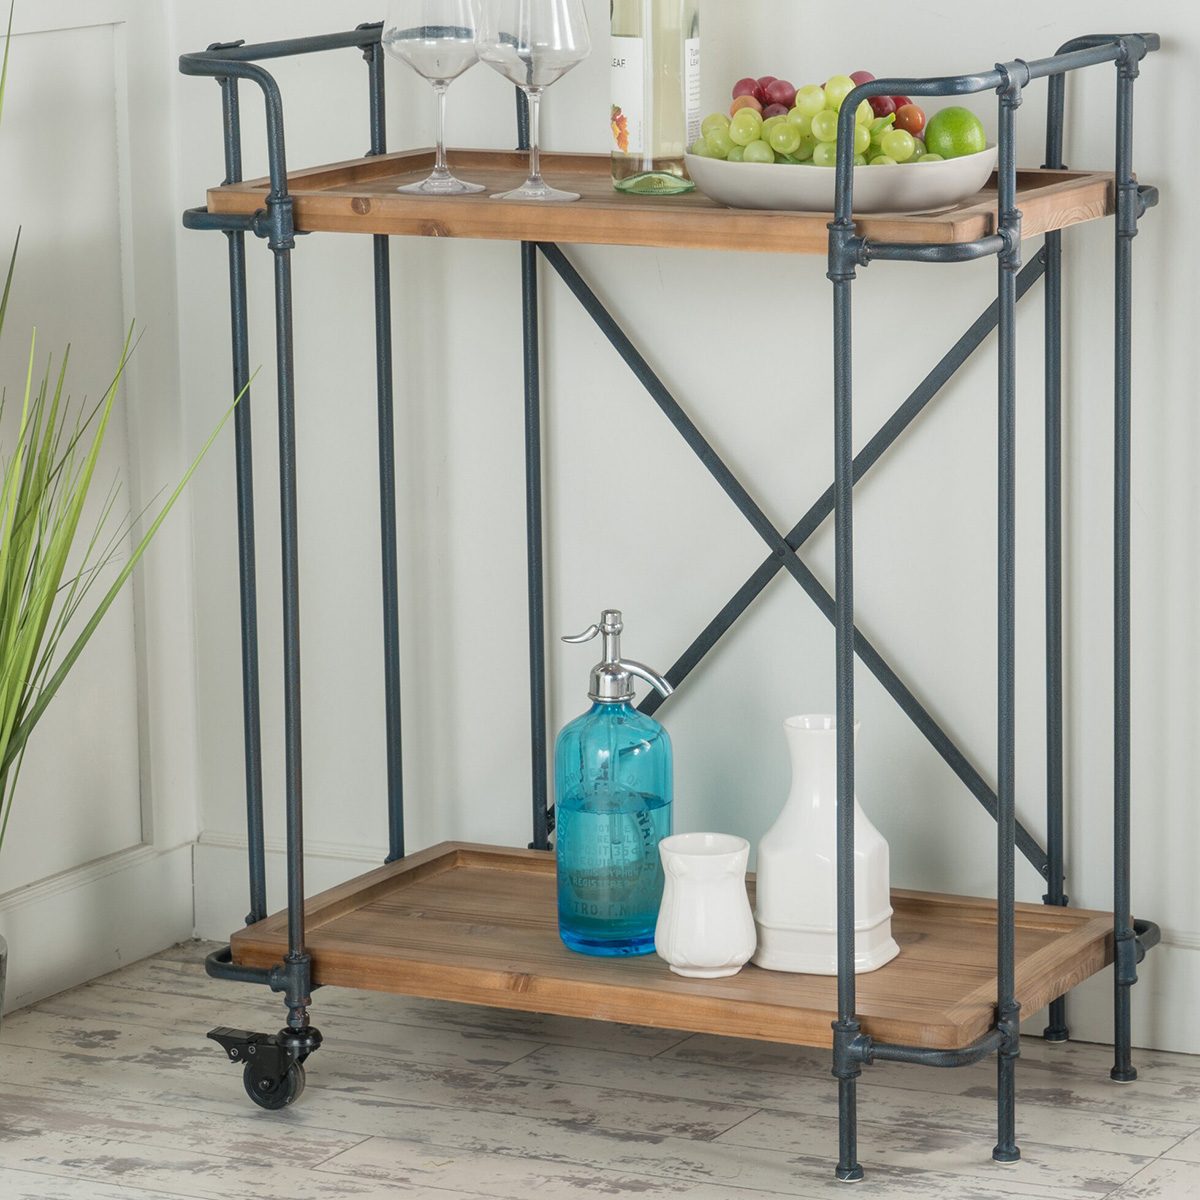 Memoriseren Intrekking Bibliografie The Perfect Home Bar Cart for Every Style (And Price Point)